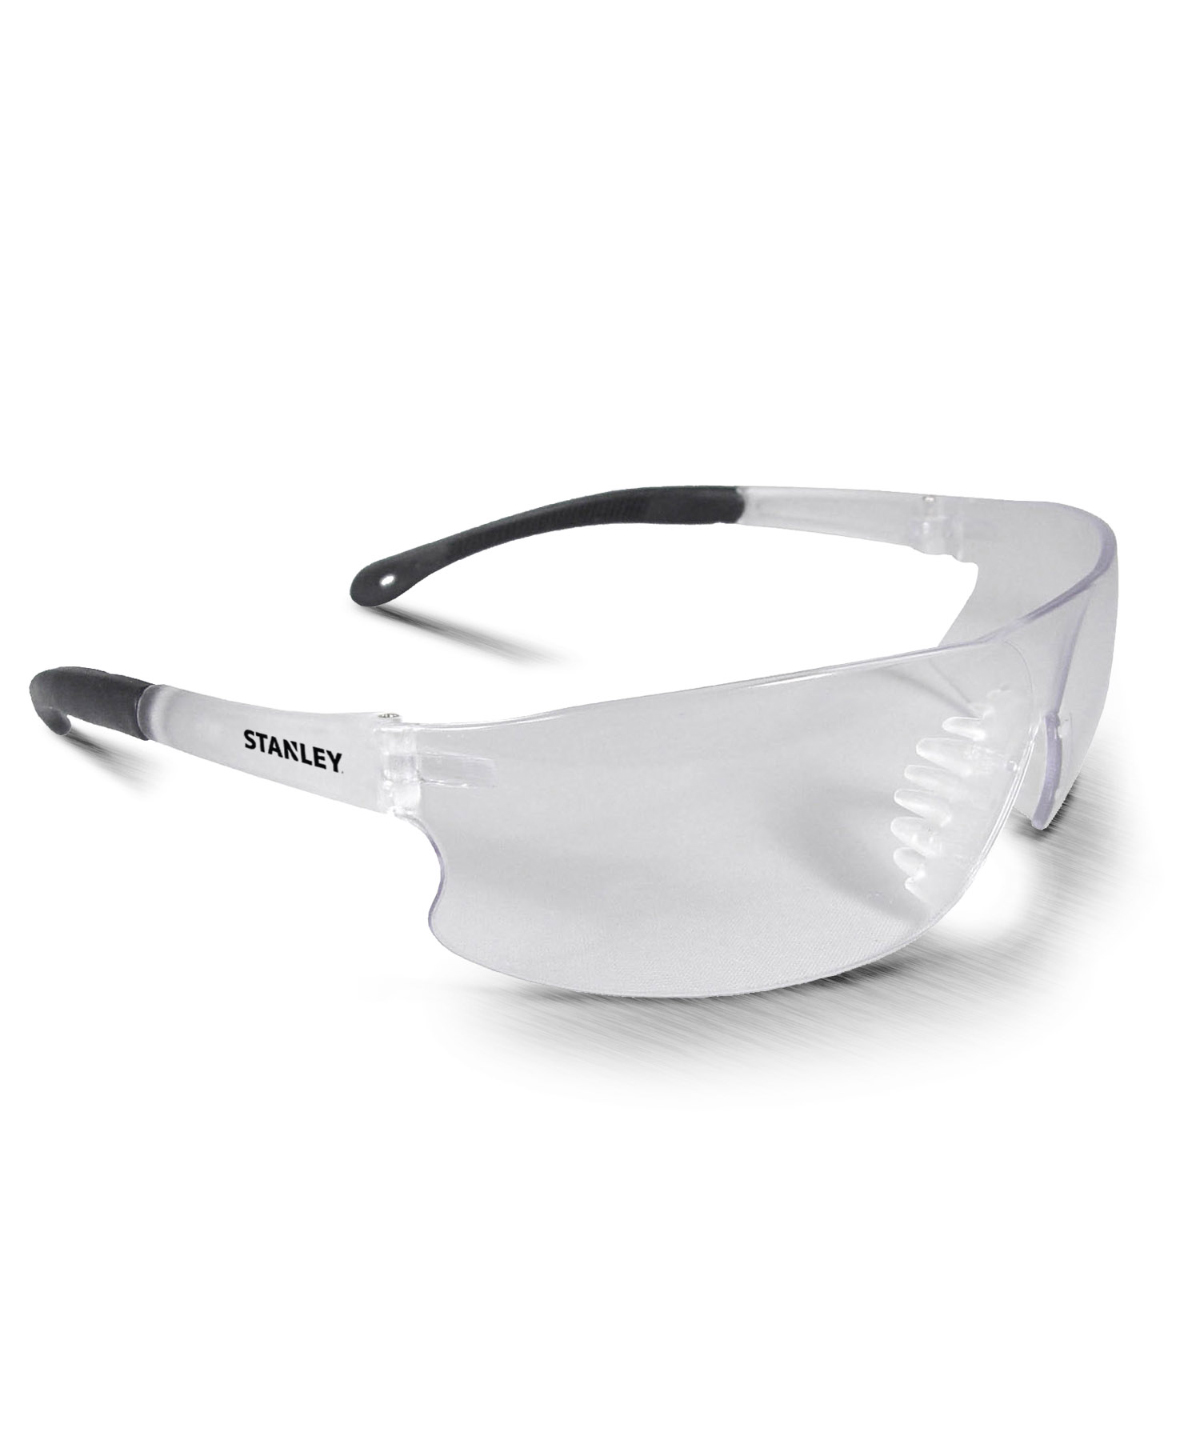 Stanley Frameless Protective Eyewear Clear (-1D) Size One Size